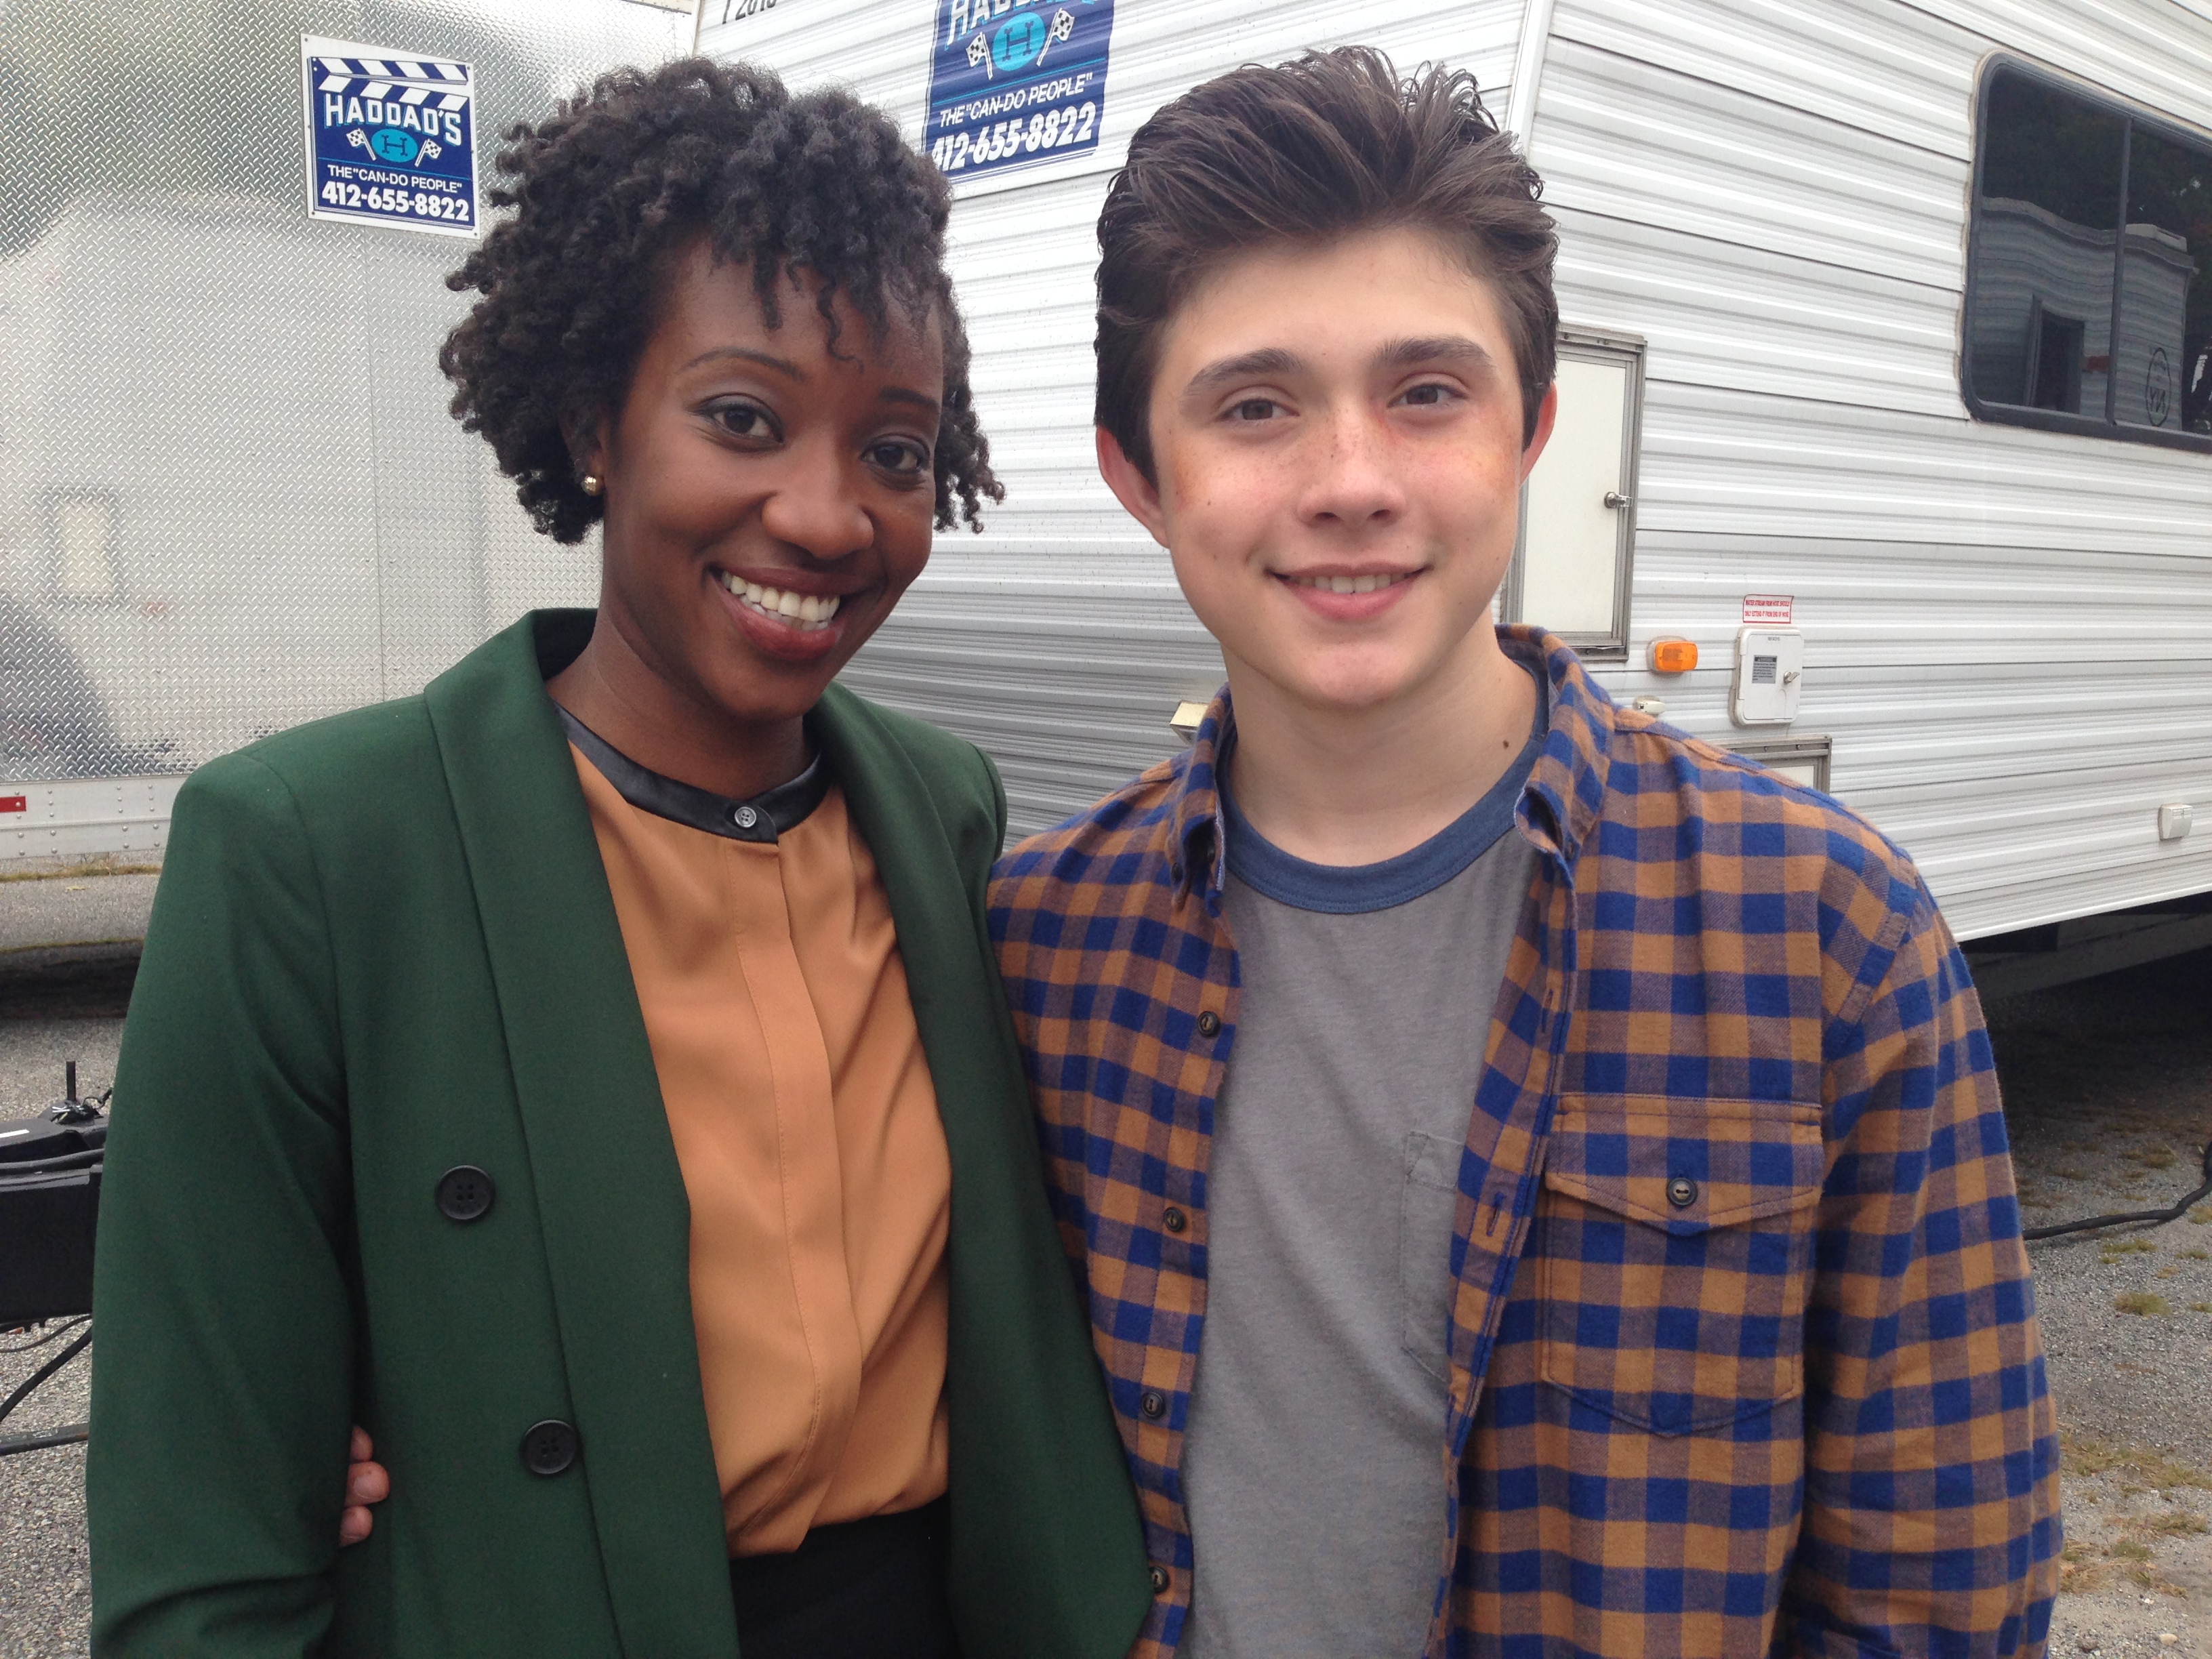 M. Hyman and Mateus Ward on set of CBS's Hostages